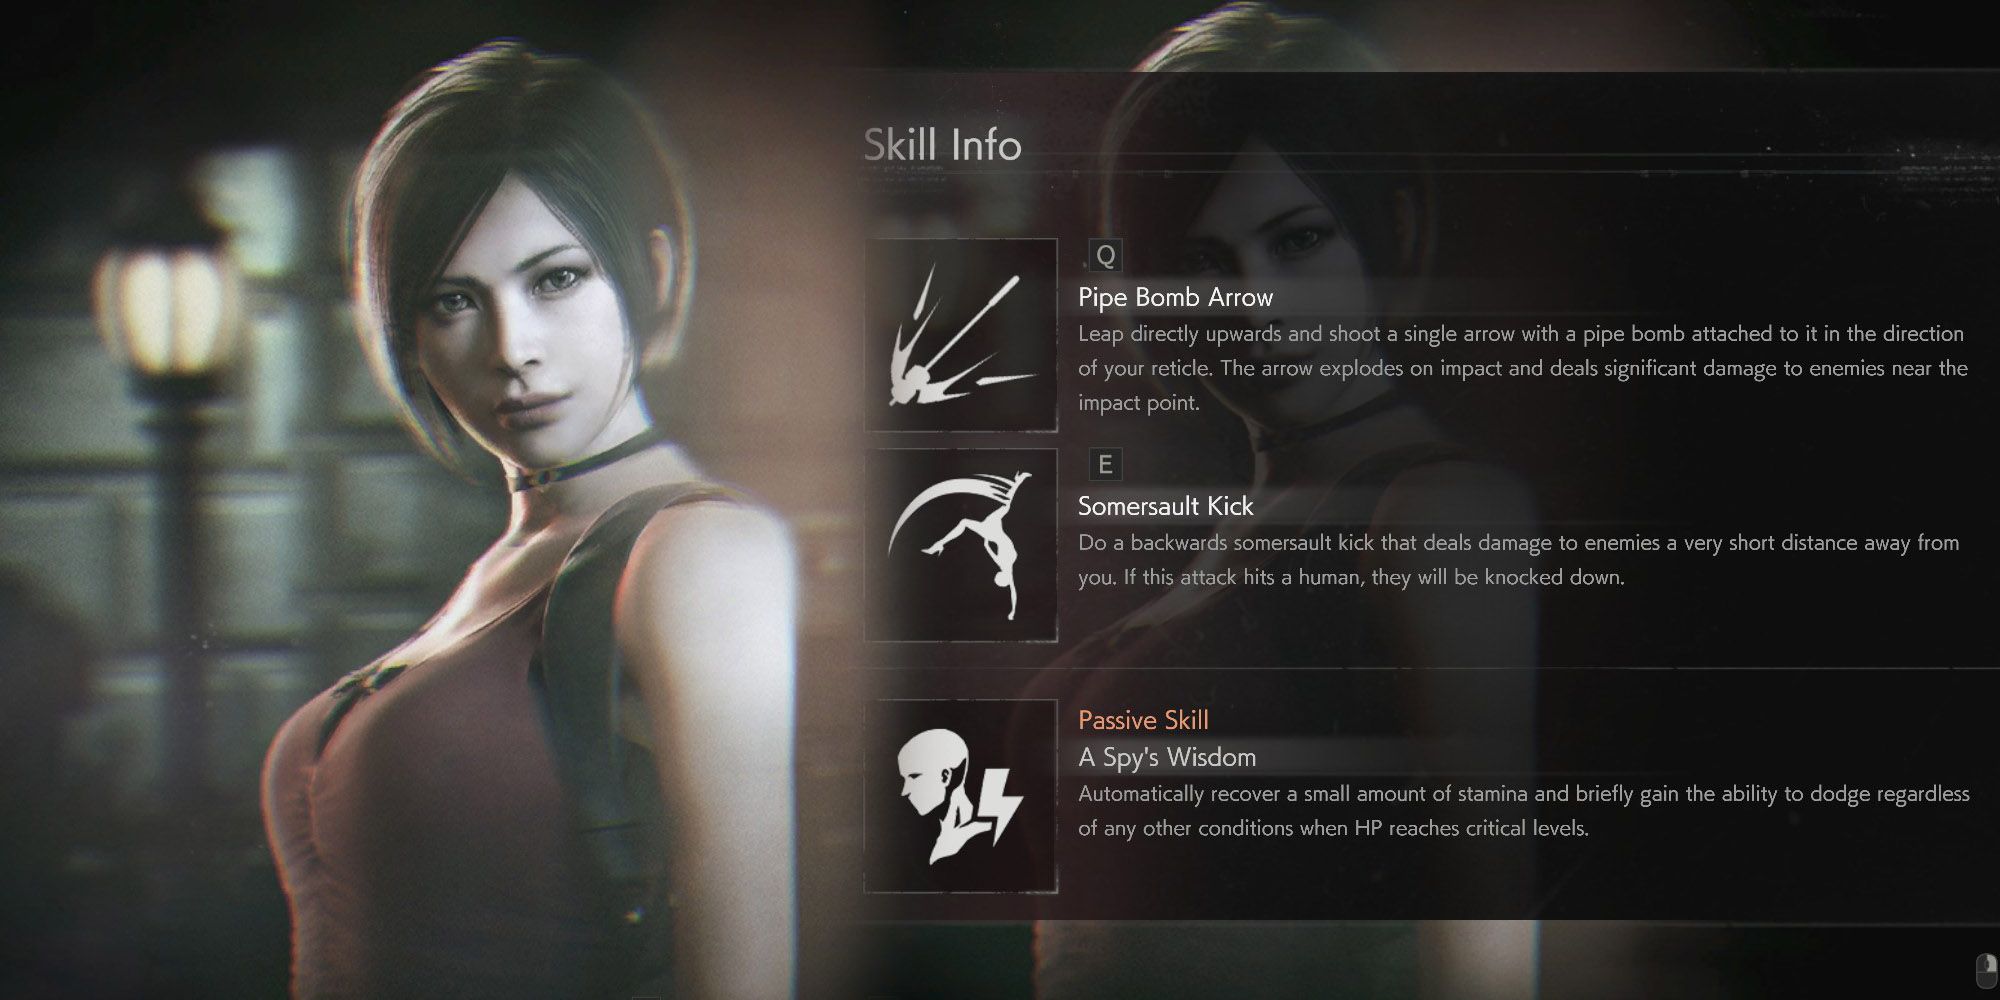 Resident Evil ReVerse - Ada Wong Portrait In-Game Next To Skill Descriptions